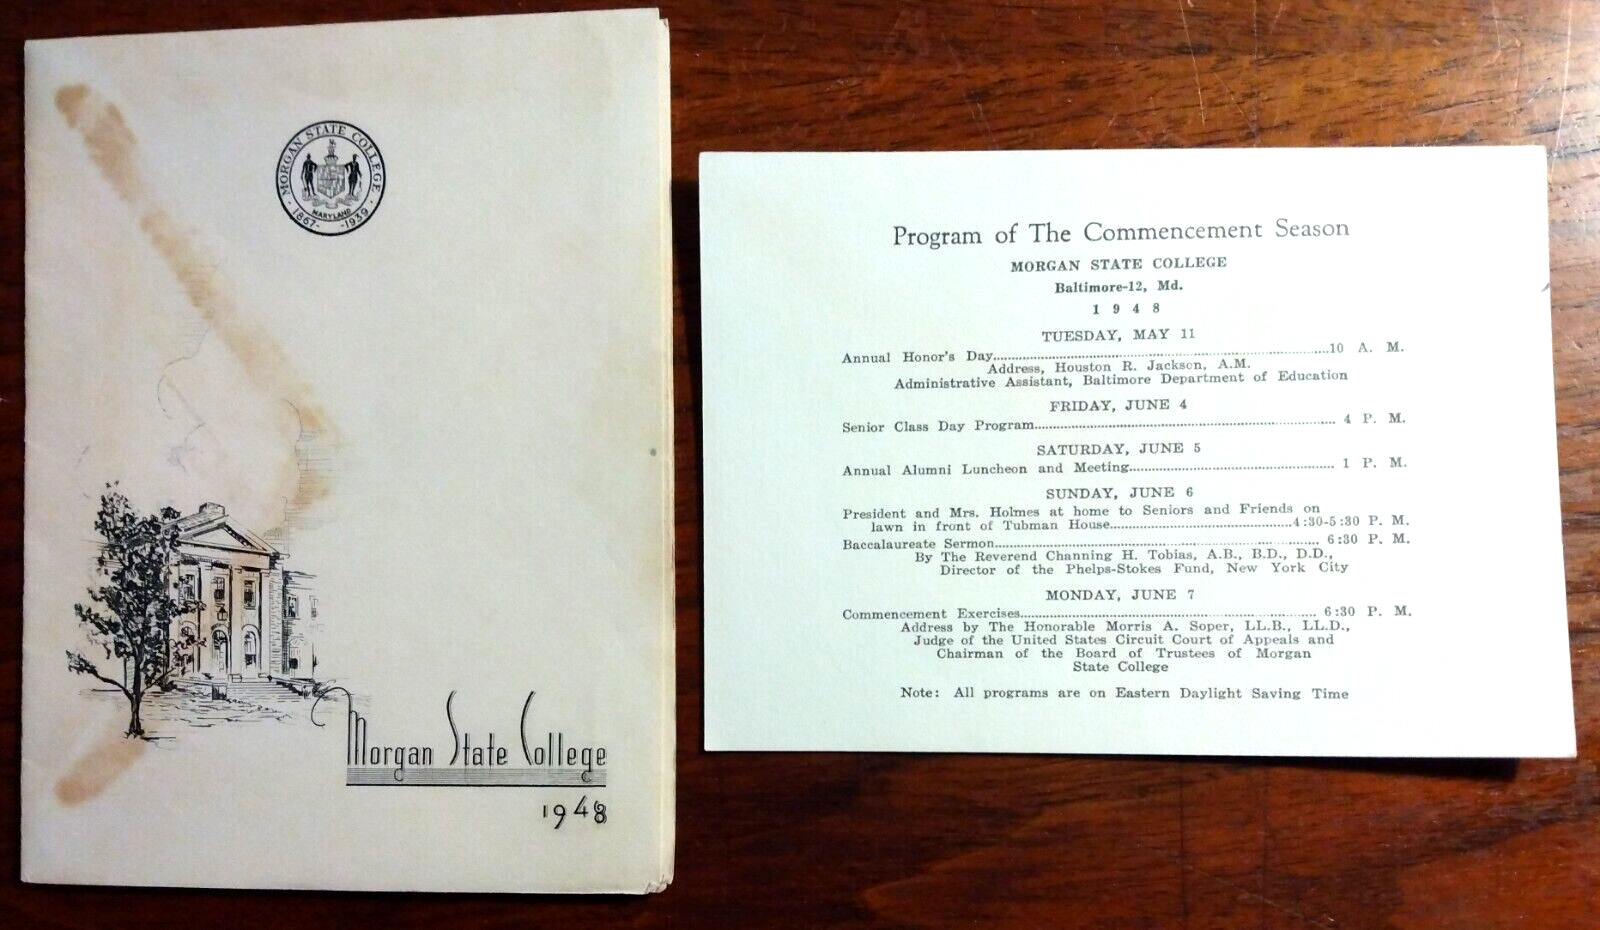 1948 Morgan State College Announcement of Commencement Exercises & Program